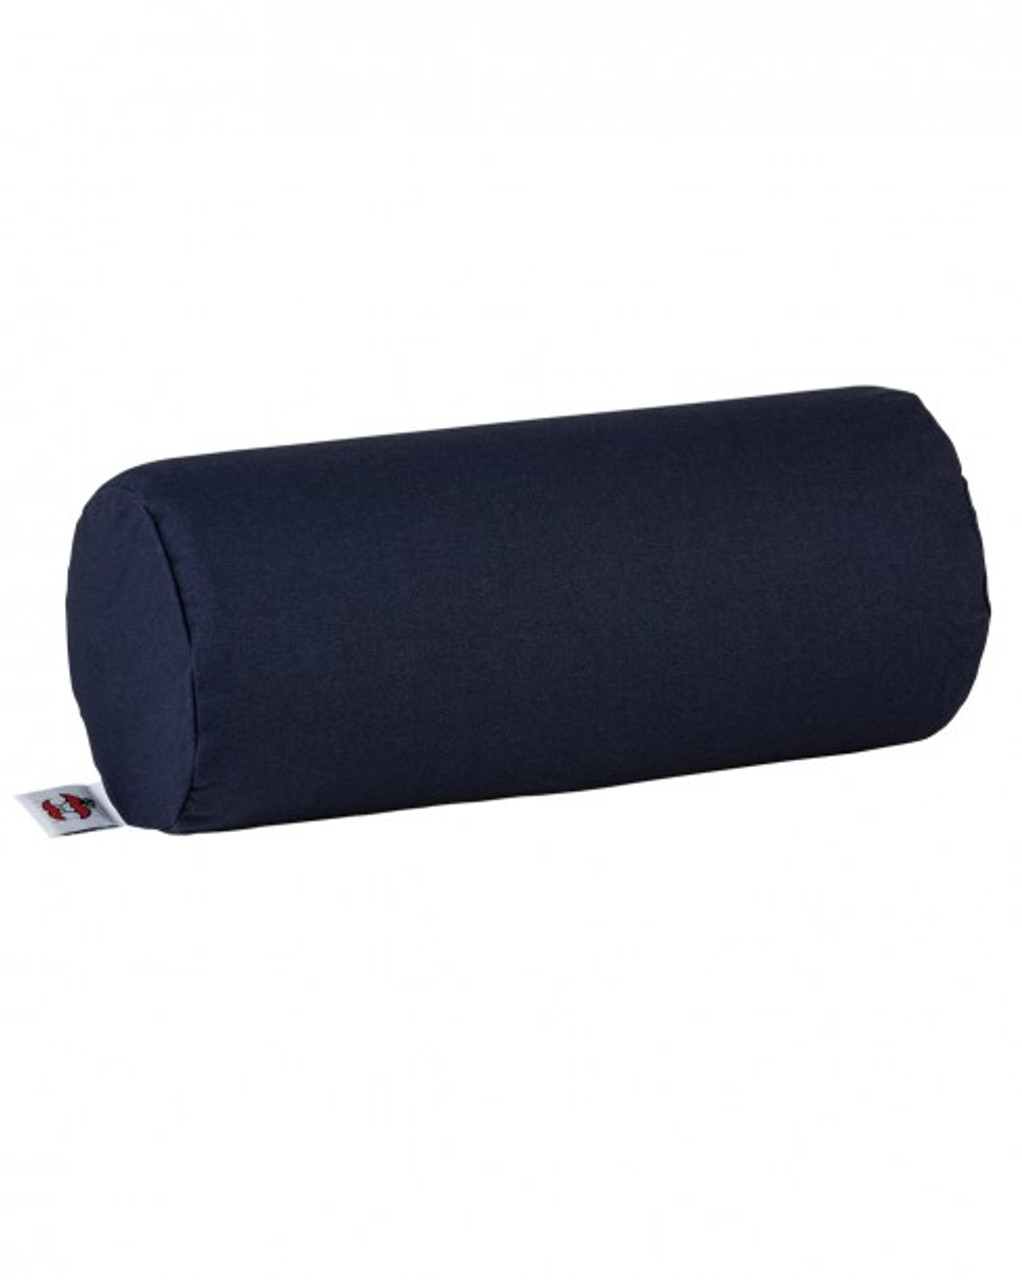 Core Products ROL-314 3" Foam Roll SP